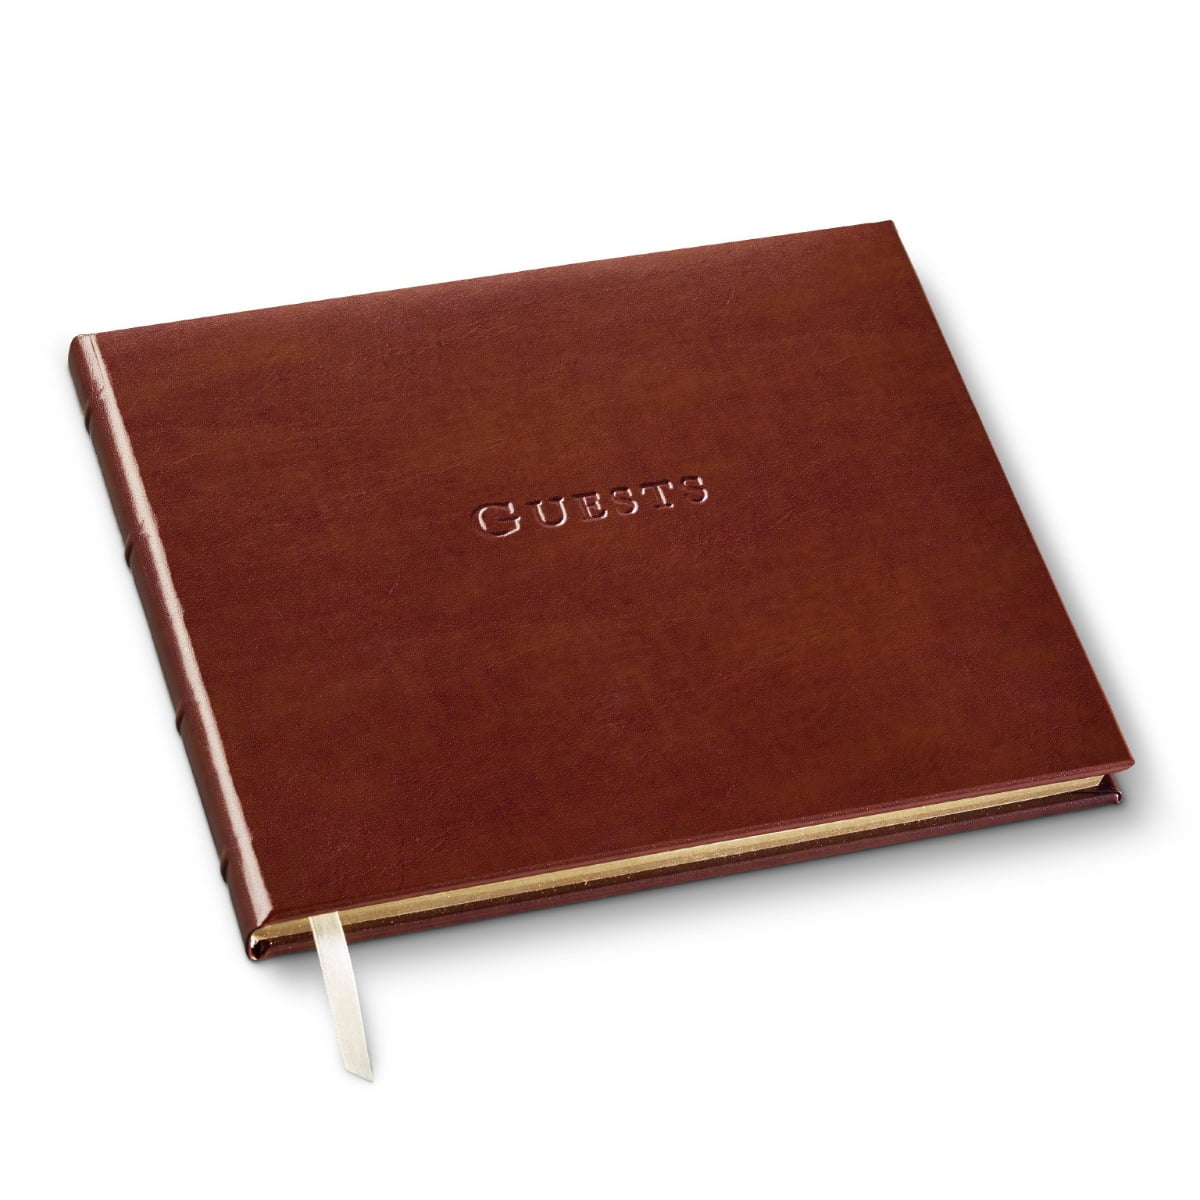 Leather Guest Book Journal by Gallery Leather, 7 x 9, 192 Gold